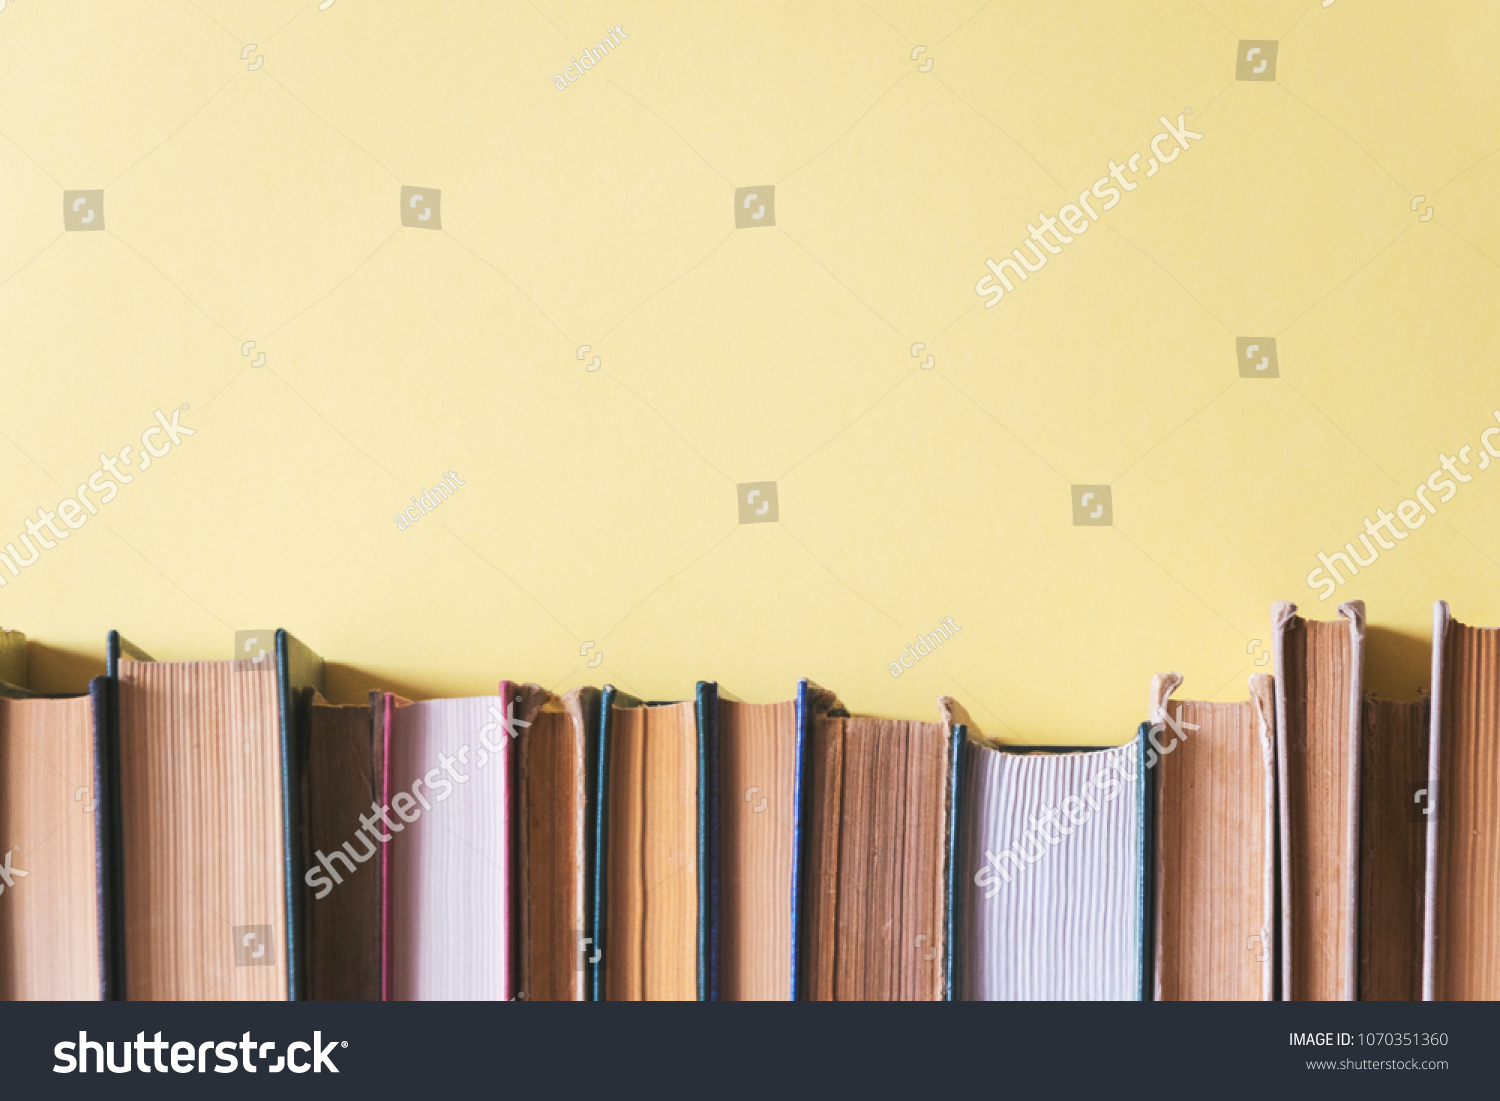 old books on a shelf with a yellow background #1070351360